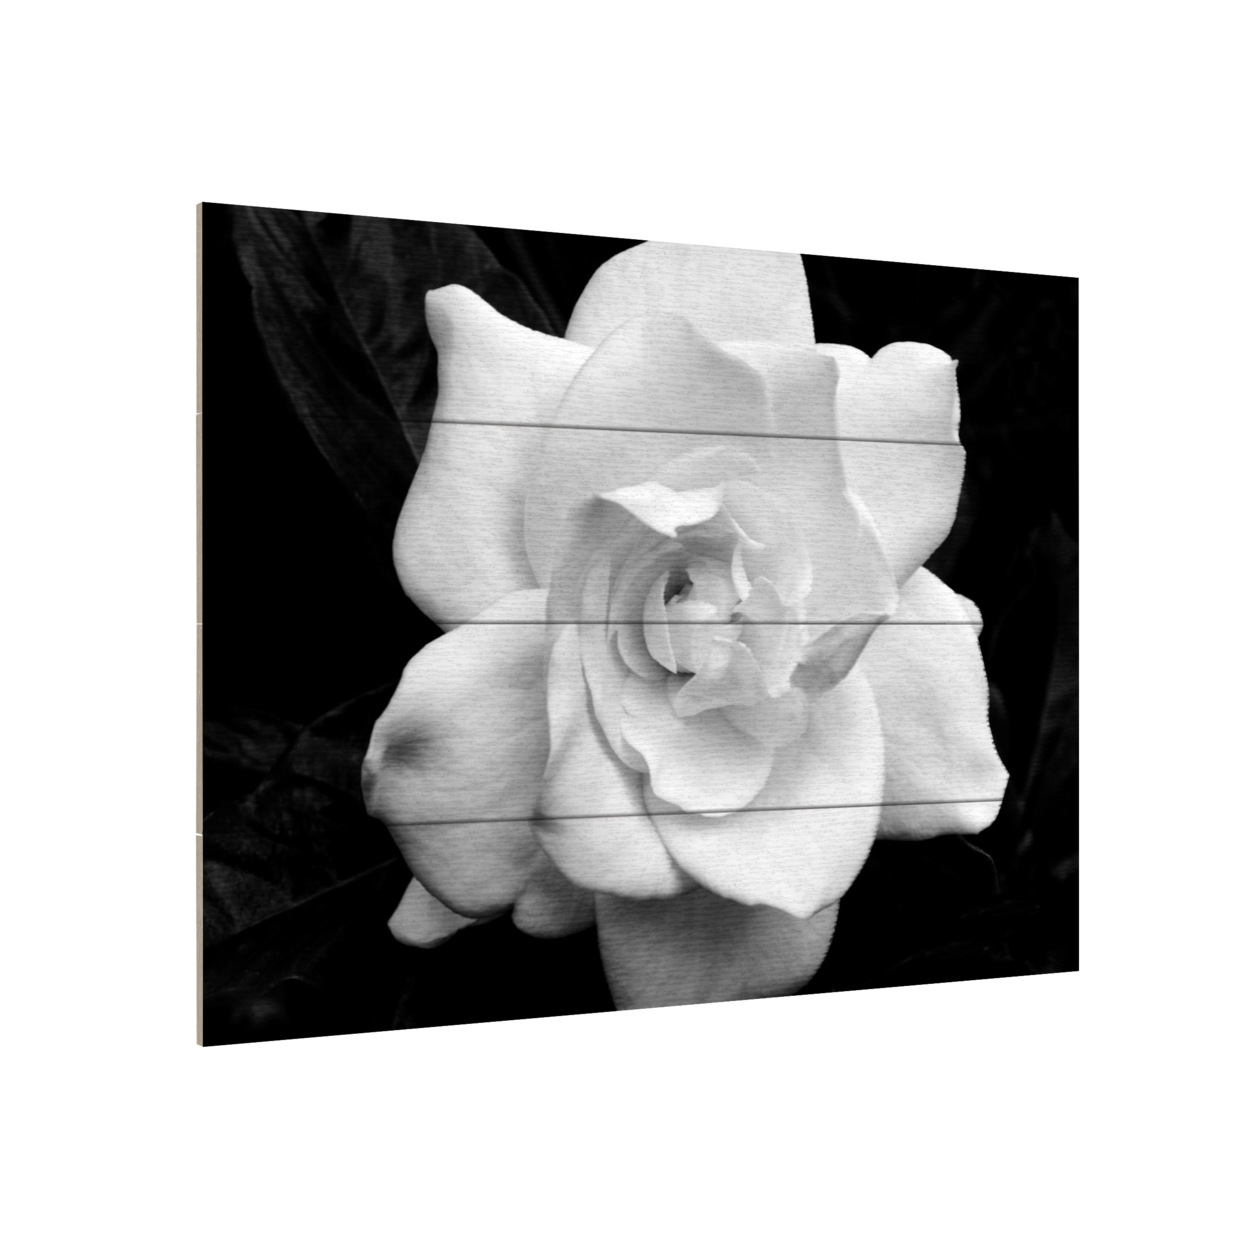 Wall Art 12 X 16 Inches Titled Gardenia In Black And White Ready To Hang Printed On Wooden Planks